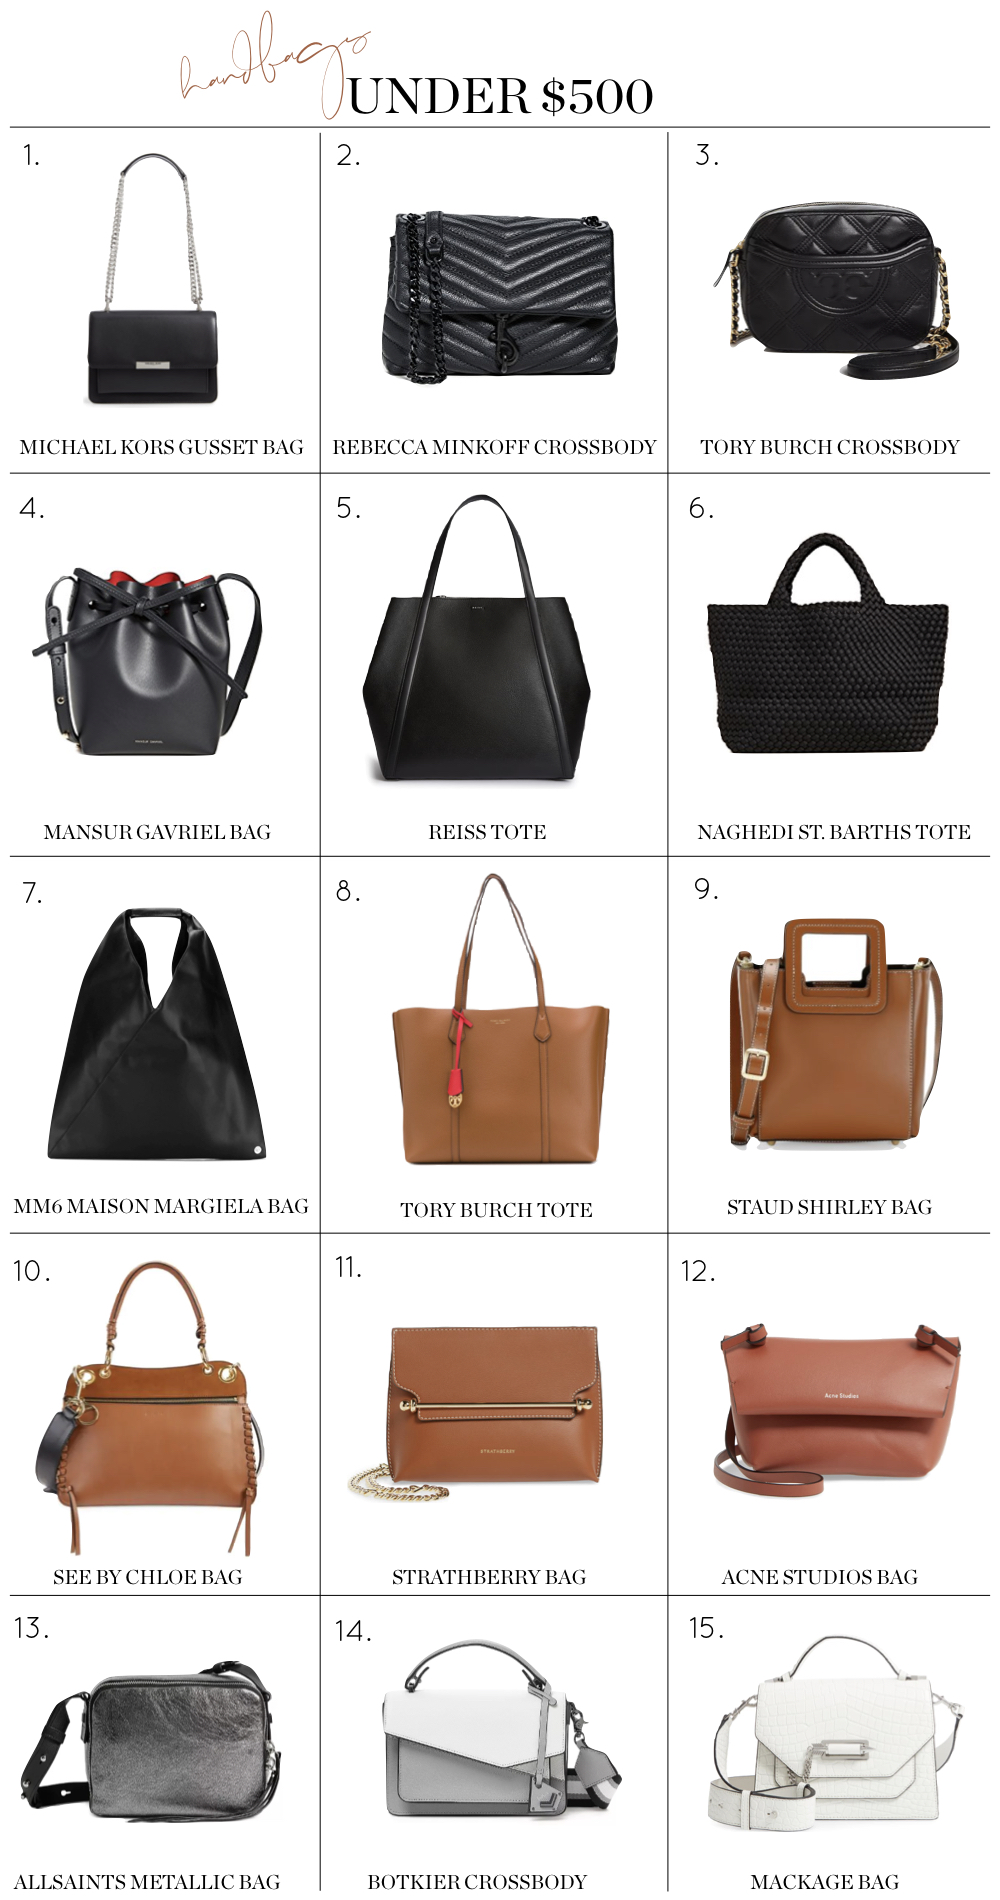 Handbags Under $500, Fashion blogger Erin Busbee of BusbeeStyle.com sharing 15 handbags under $500 including Tory Burch, Rebecca Minkoff, Staud, See By Chloe, and more!